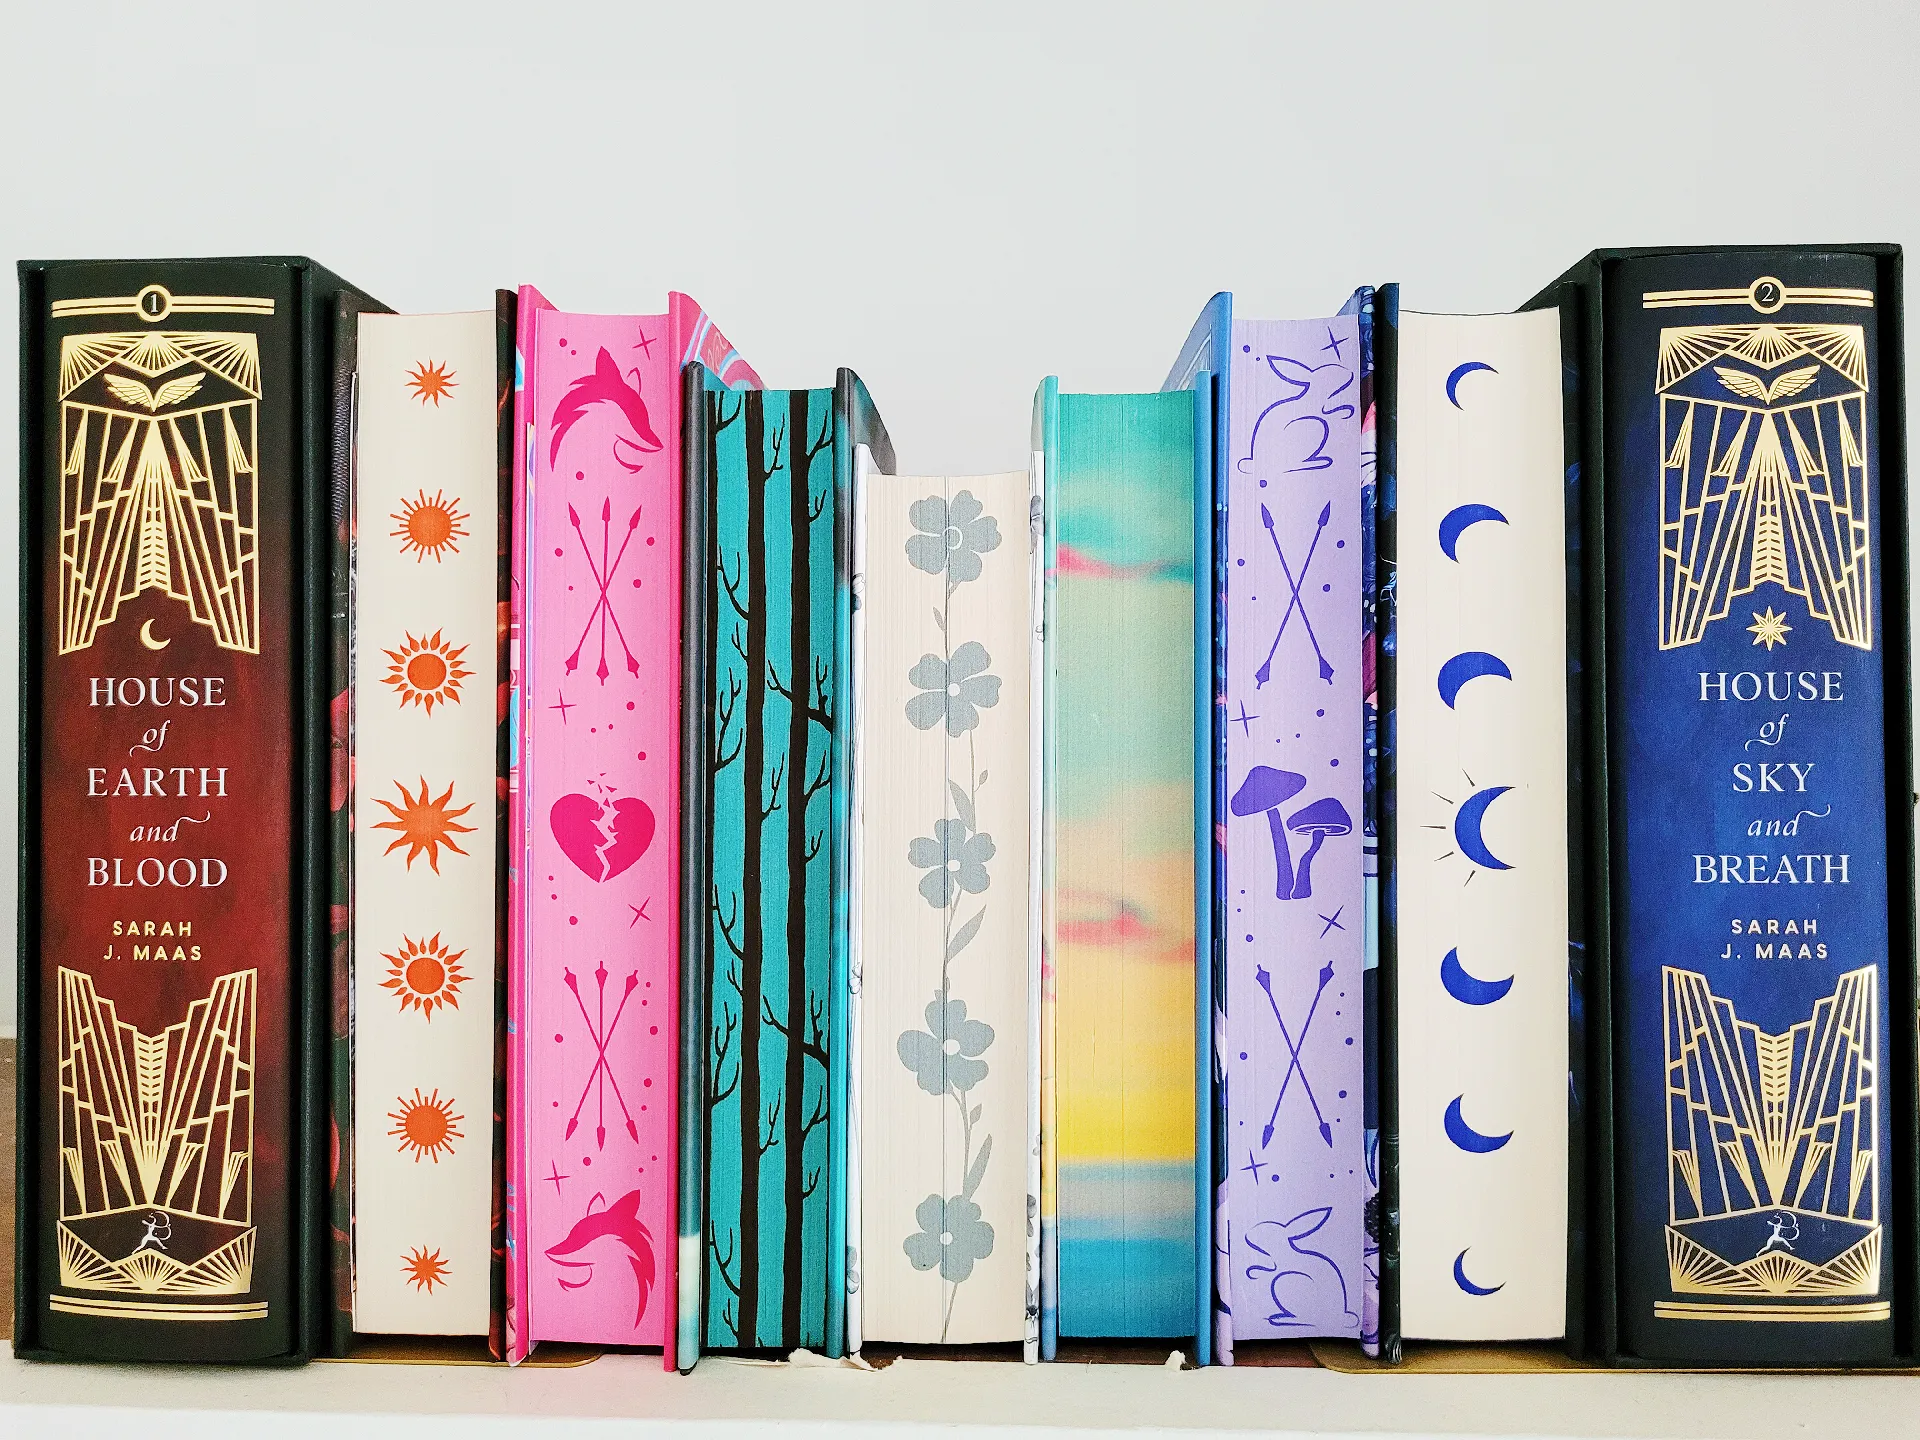 Some of my favorite sprayed edges! 📚💕✨, Gallery posted by anika janelle